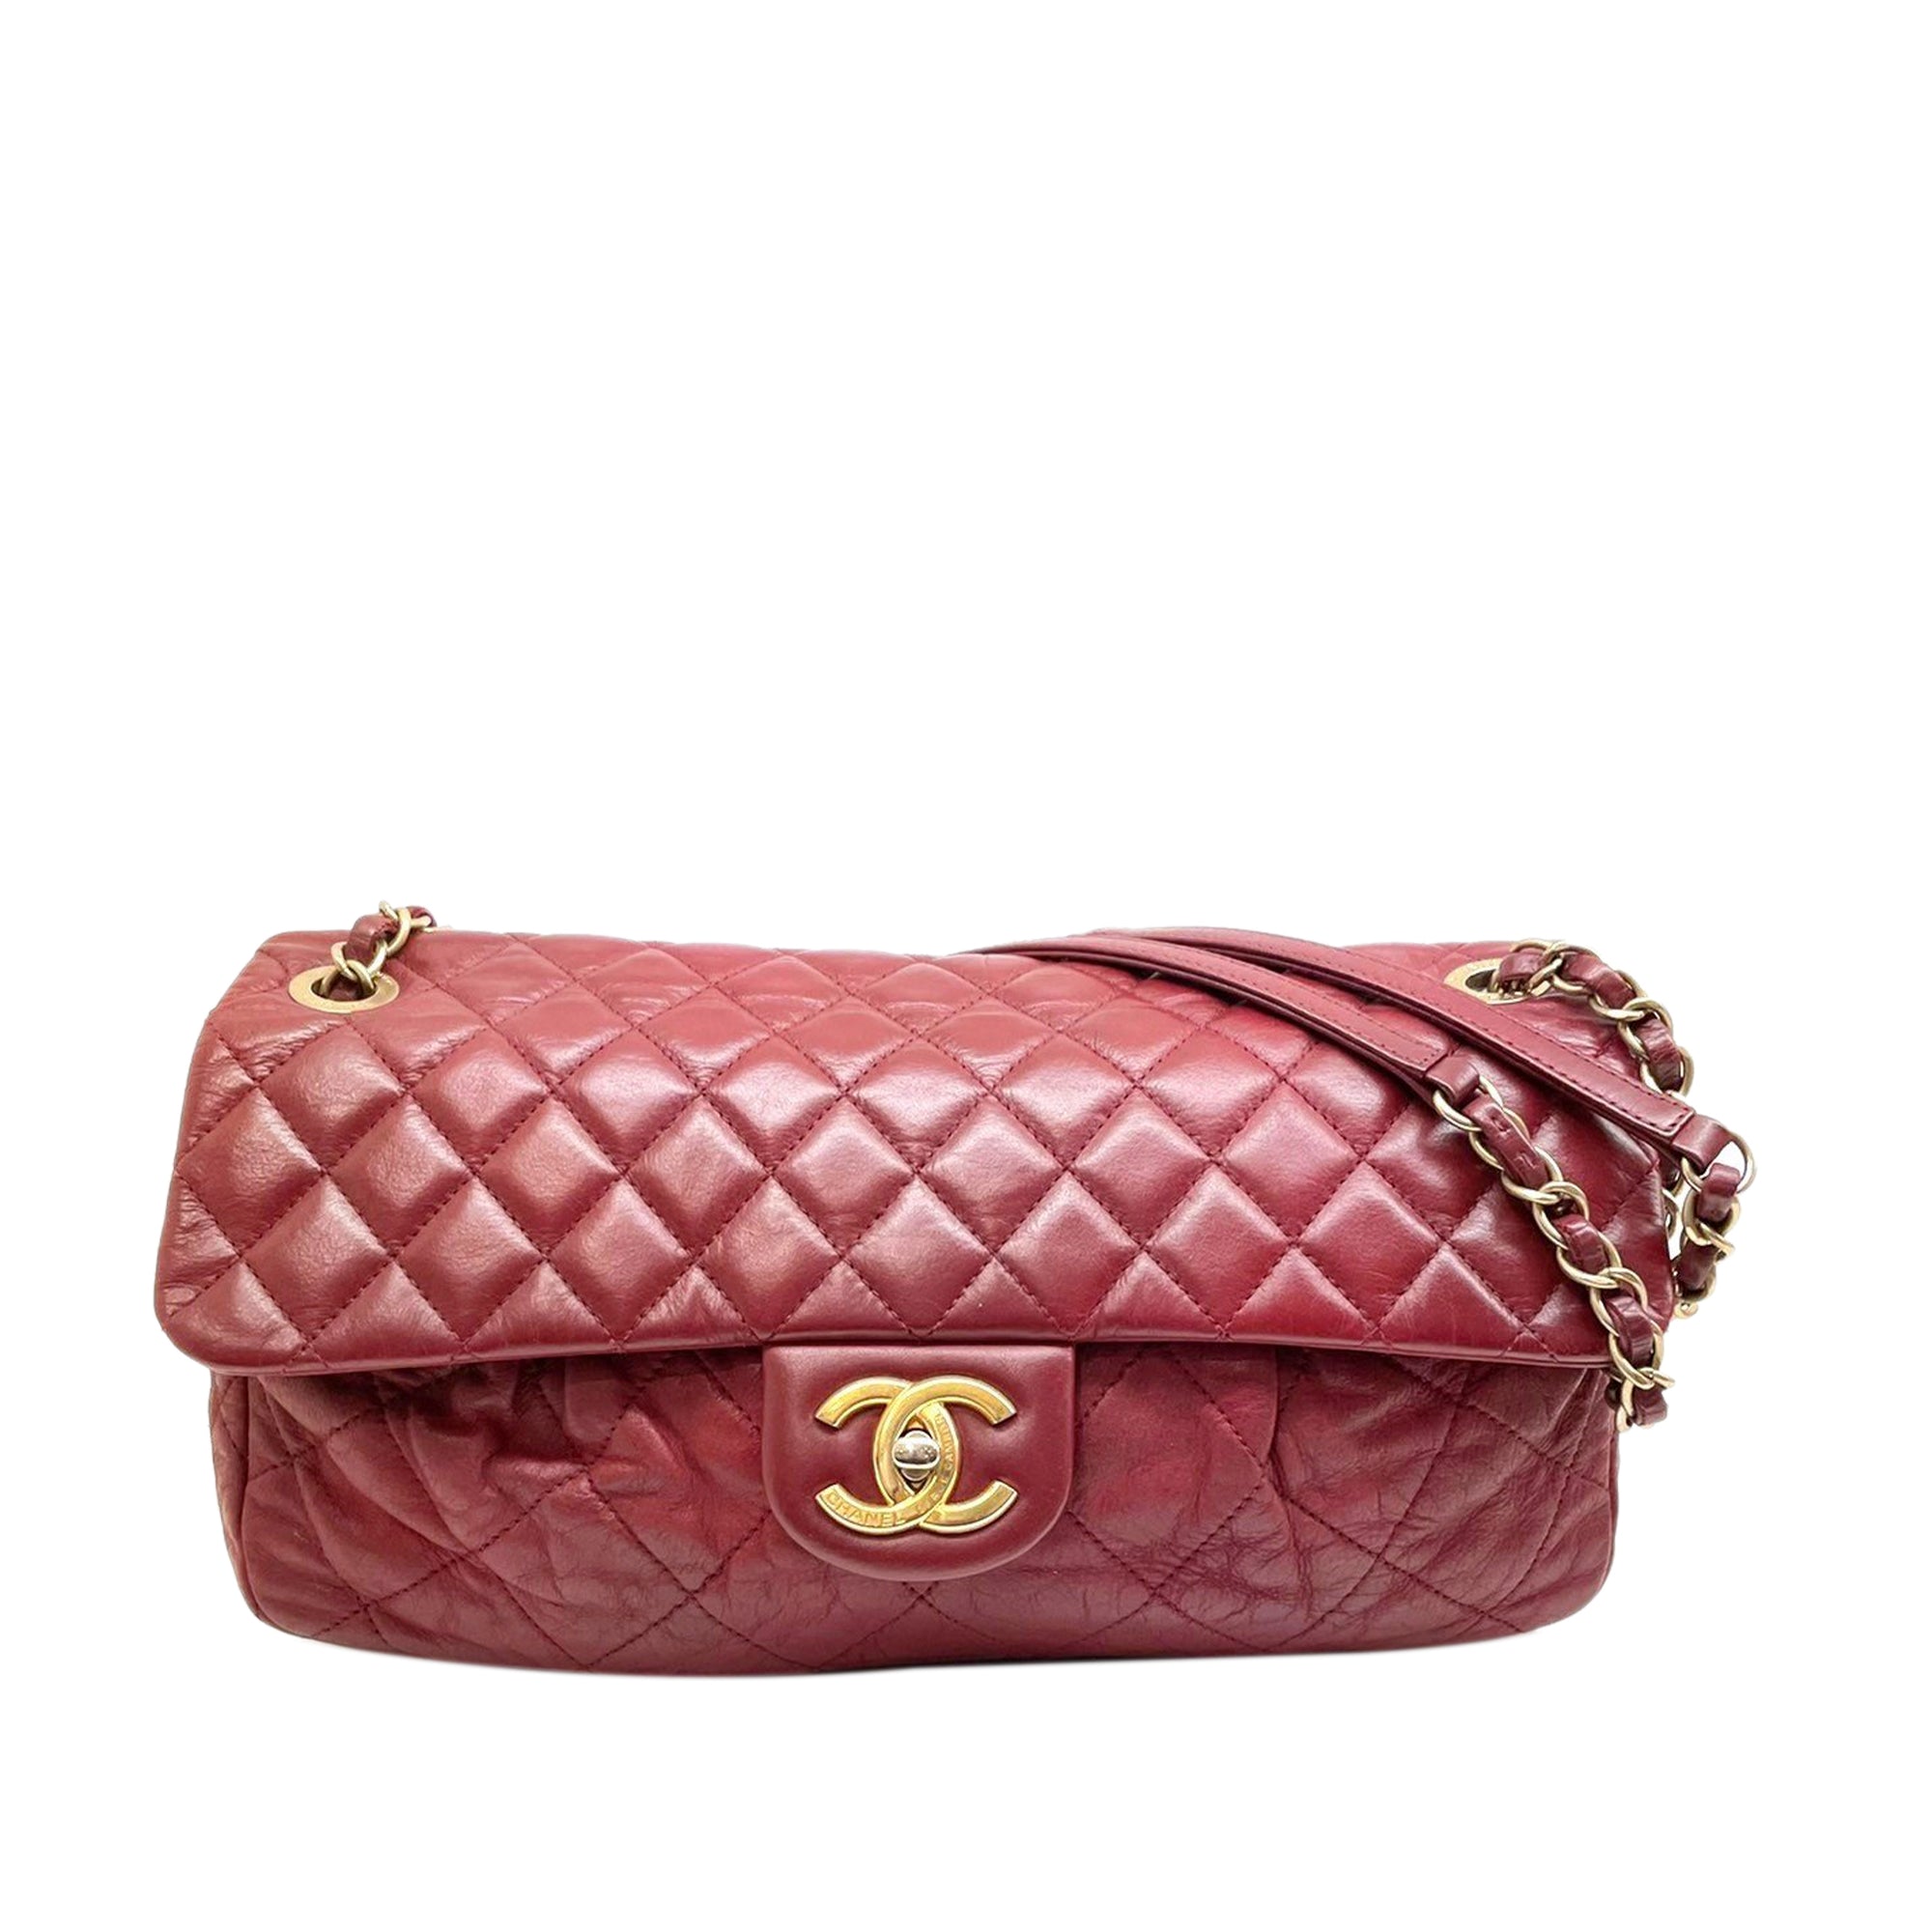 Chanel - Authenticated Timeless Classique Top Handle Handbag - Leather Burgundy for Women, Never Worn